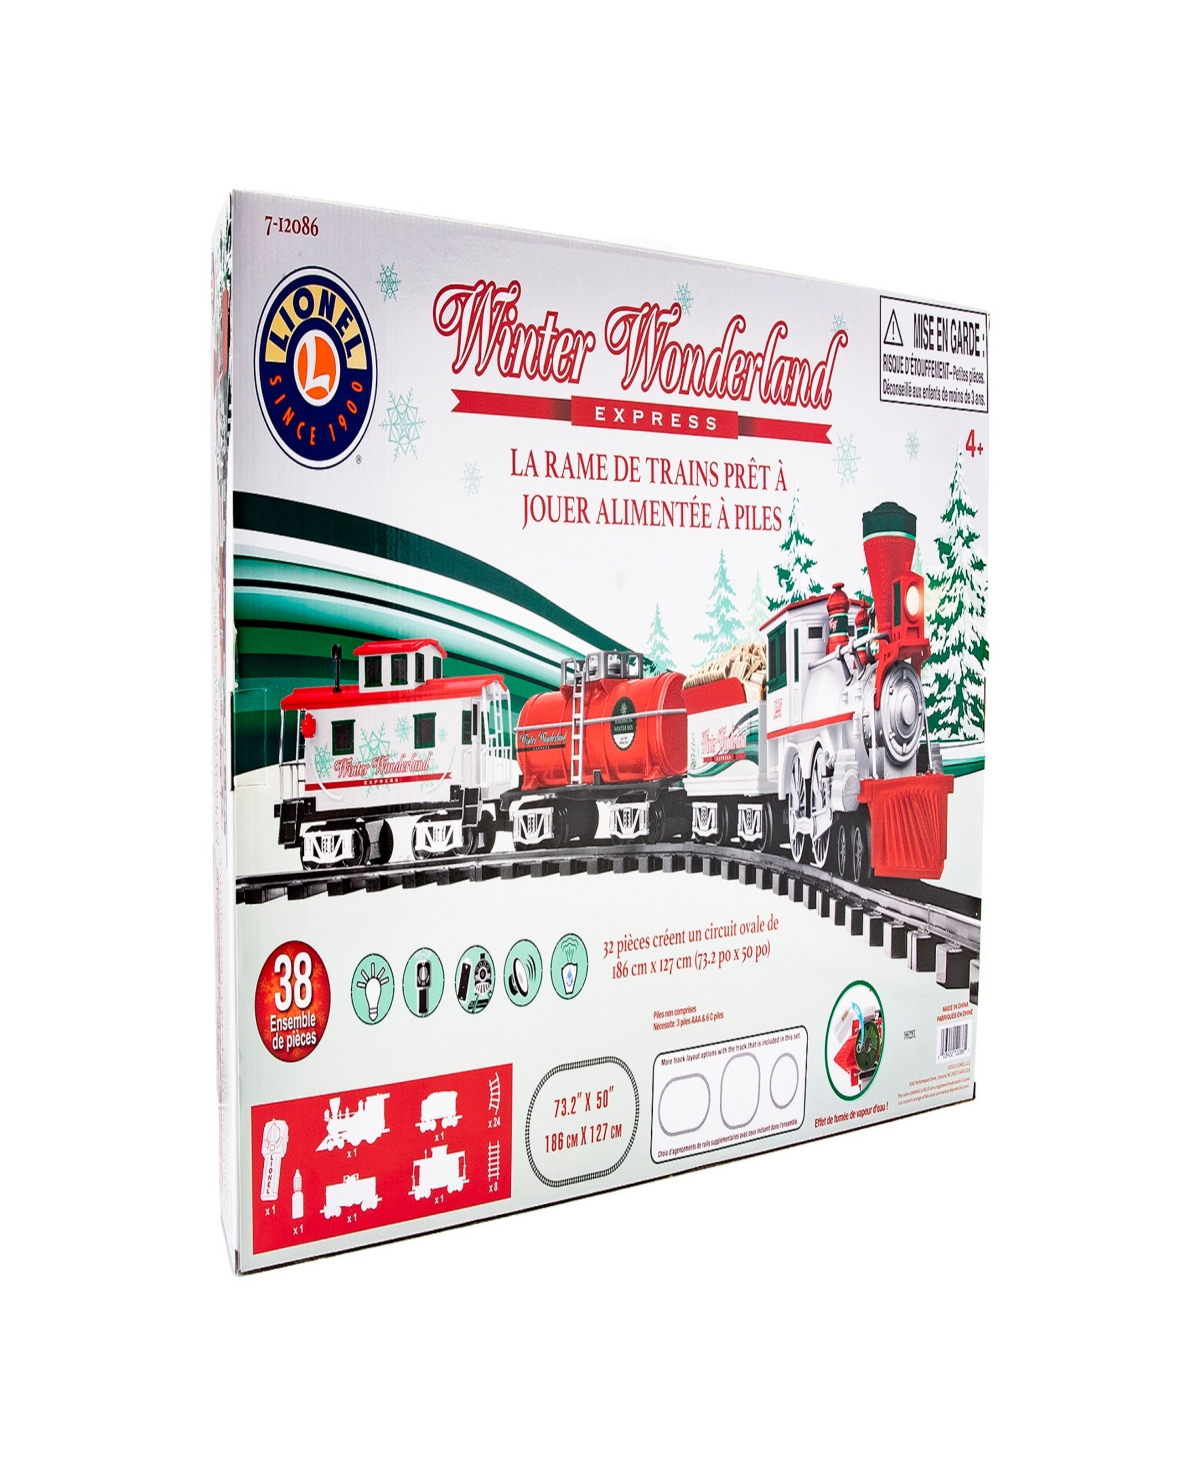 Lionel Winter Wonderland Battery-operated Ready To Play Train Set With Remote In Multi